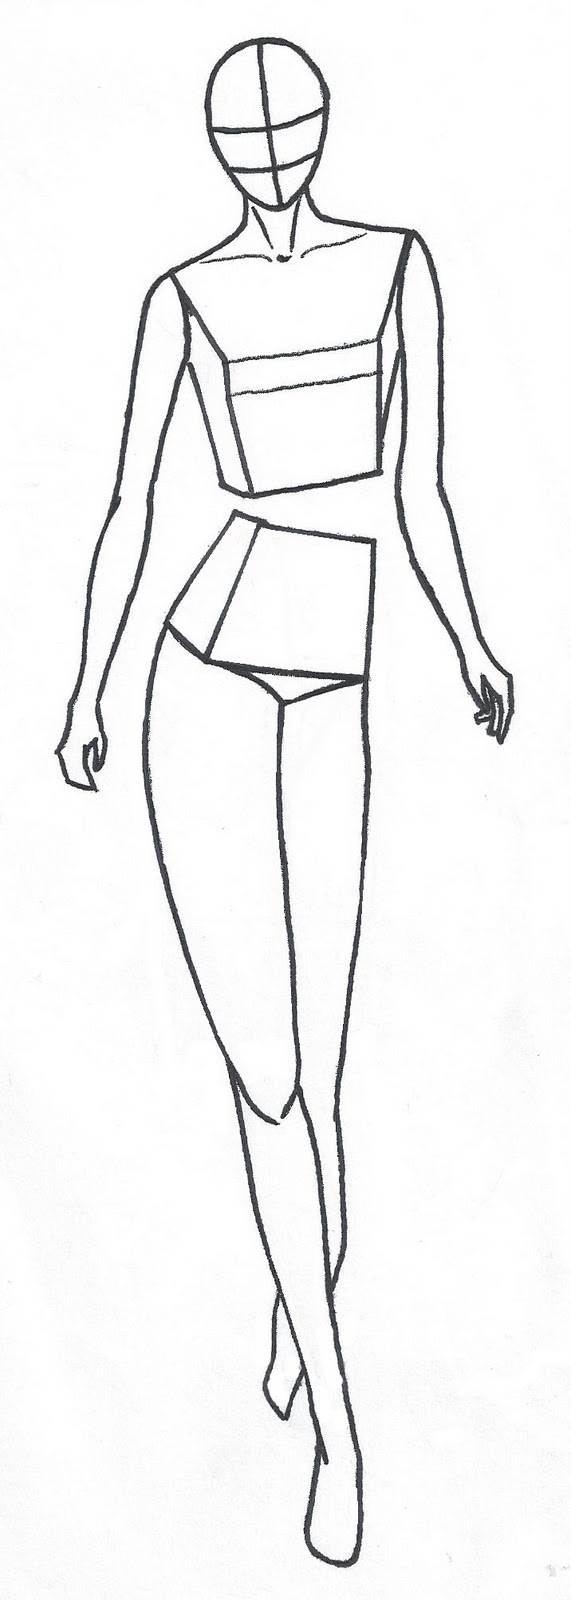 Fashion Design for Beginners: Free Fashion Figure Templates Are Here